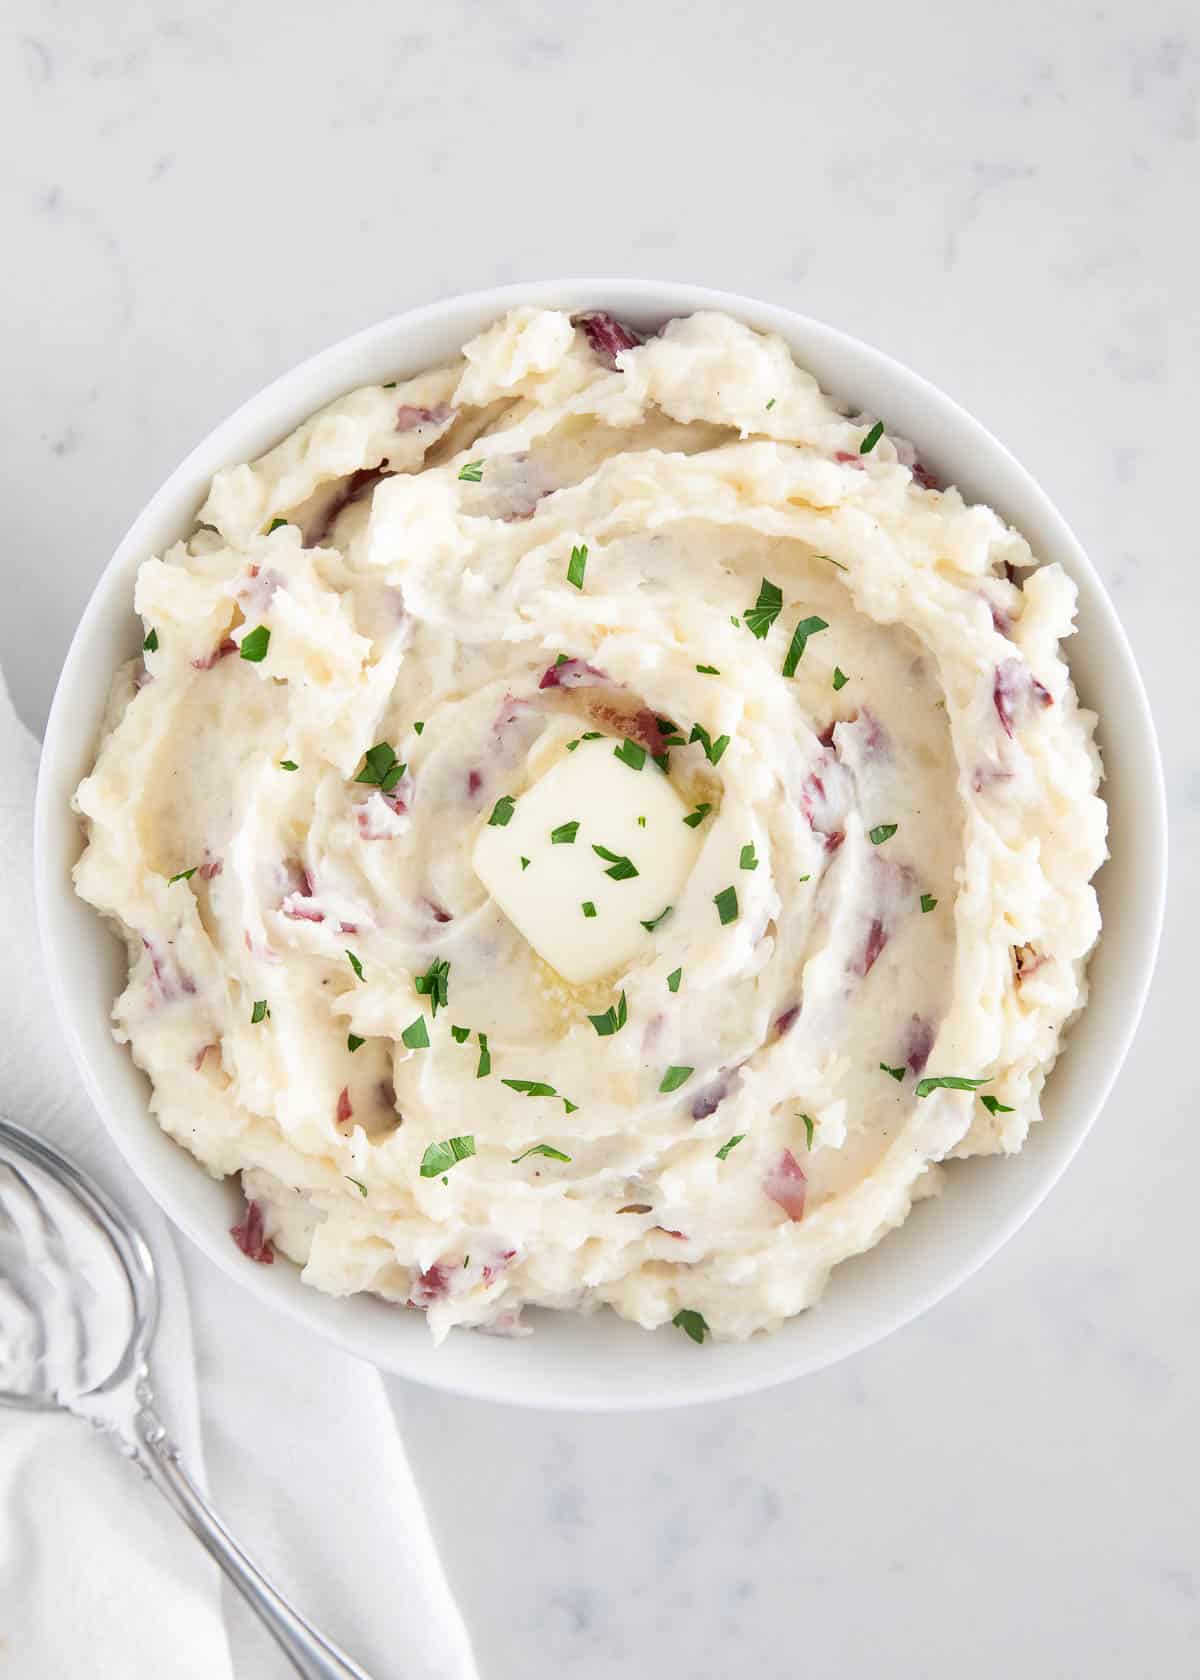 Red mashed potatoes in bowl.